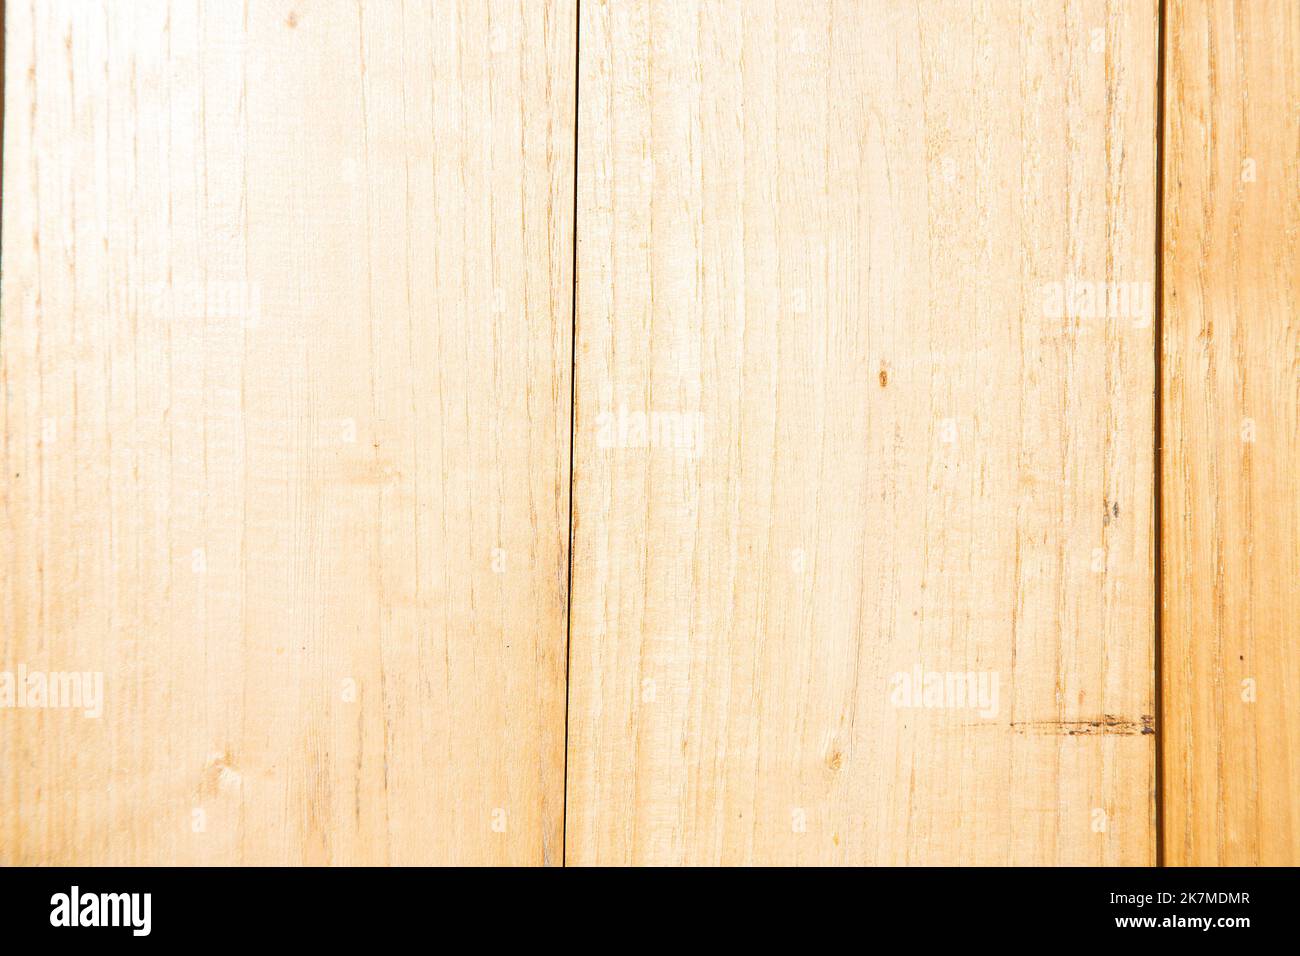 fresh light yellow pine board background. Natural ecological wallpaper. Building materials for wall decoration. Light varnished parquet board Stock Photo